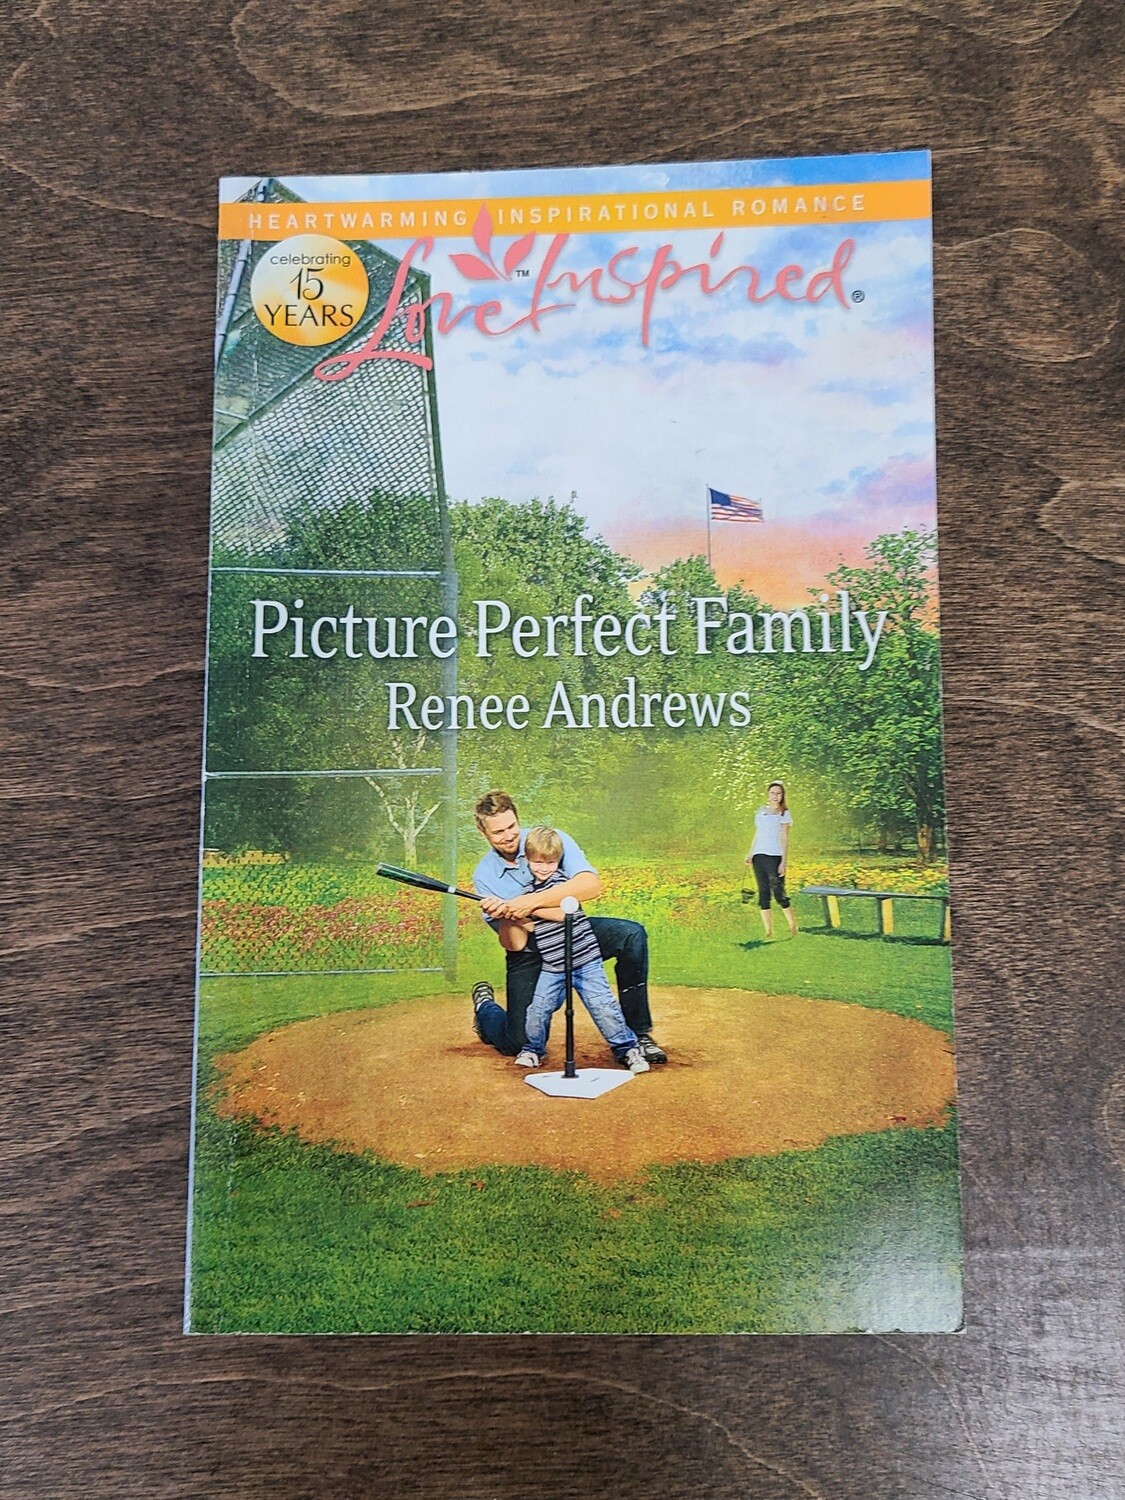 Picture Perfect Family by Renee Andrews